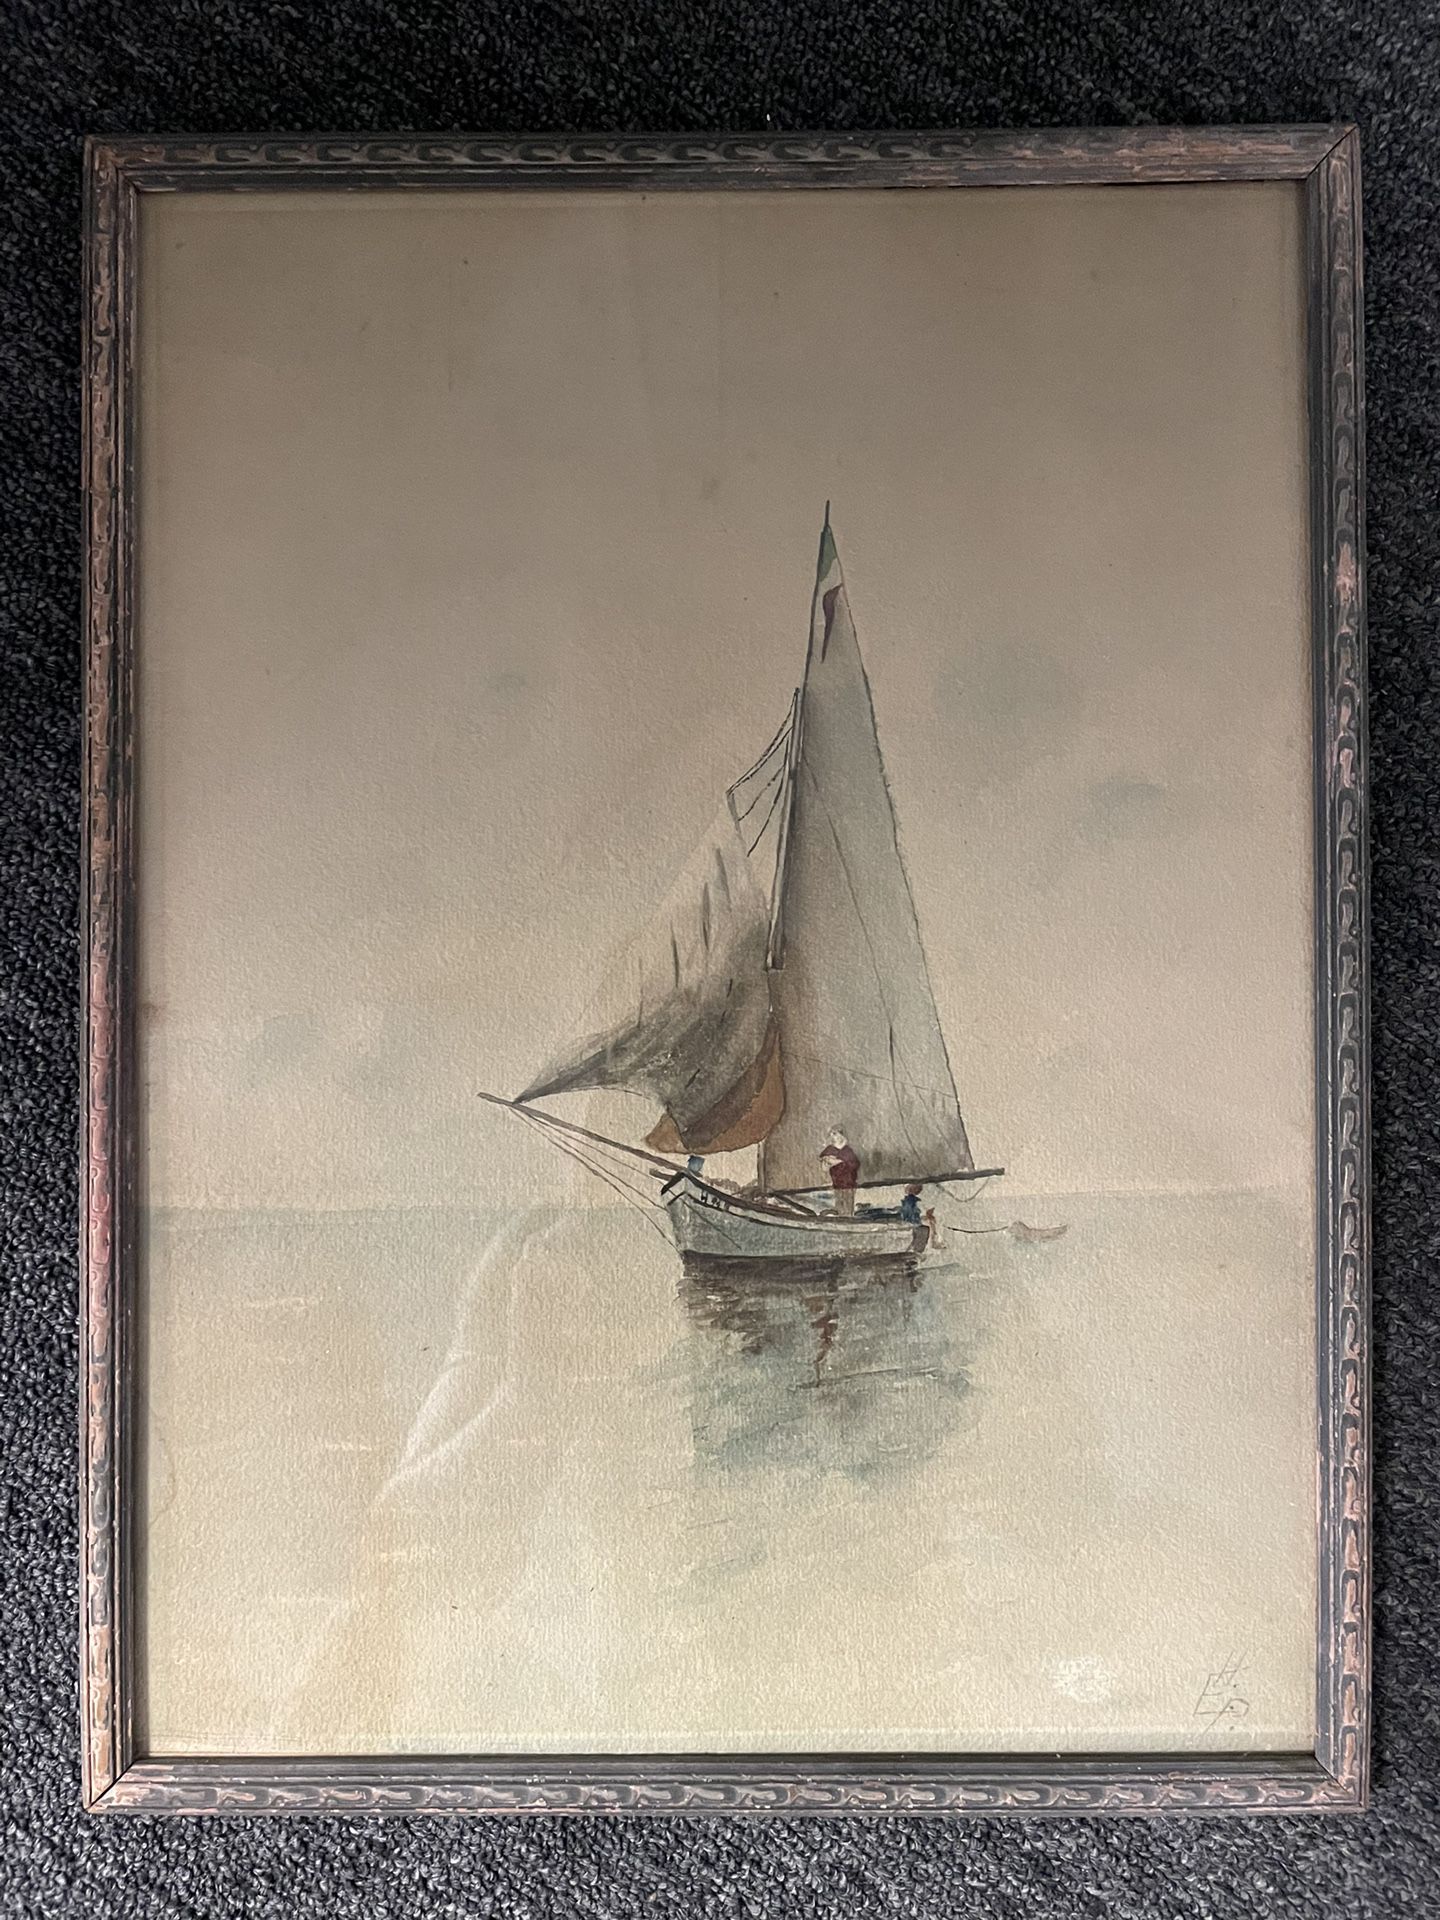 Antique European Watercolor Painting Signed